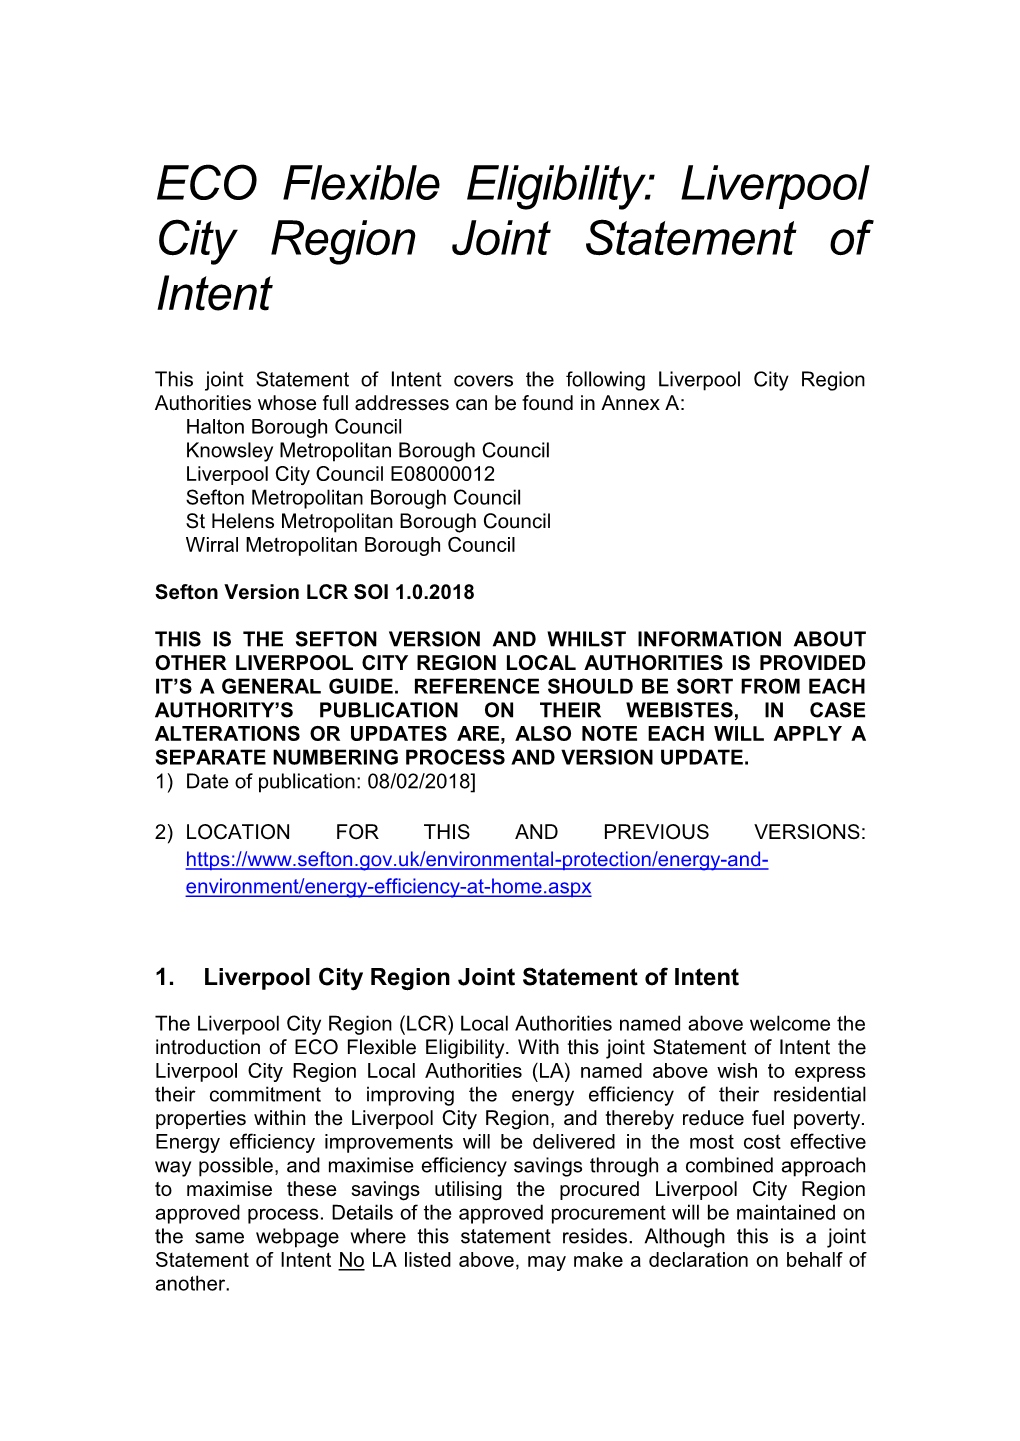 ECO Flexible Eligibility: Liverpool City Region Joint Statement of Intent